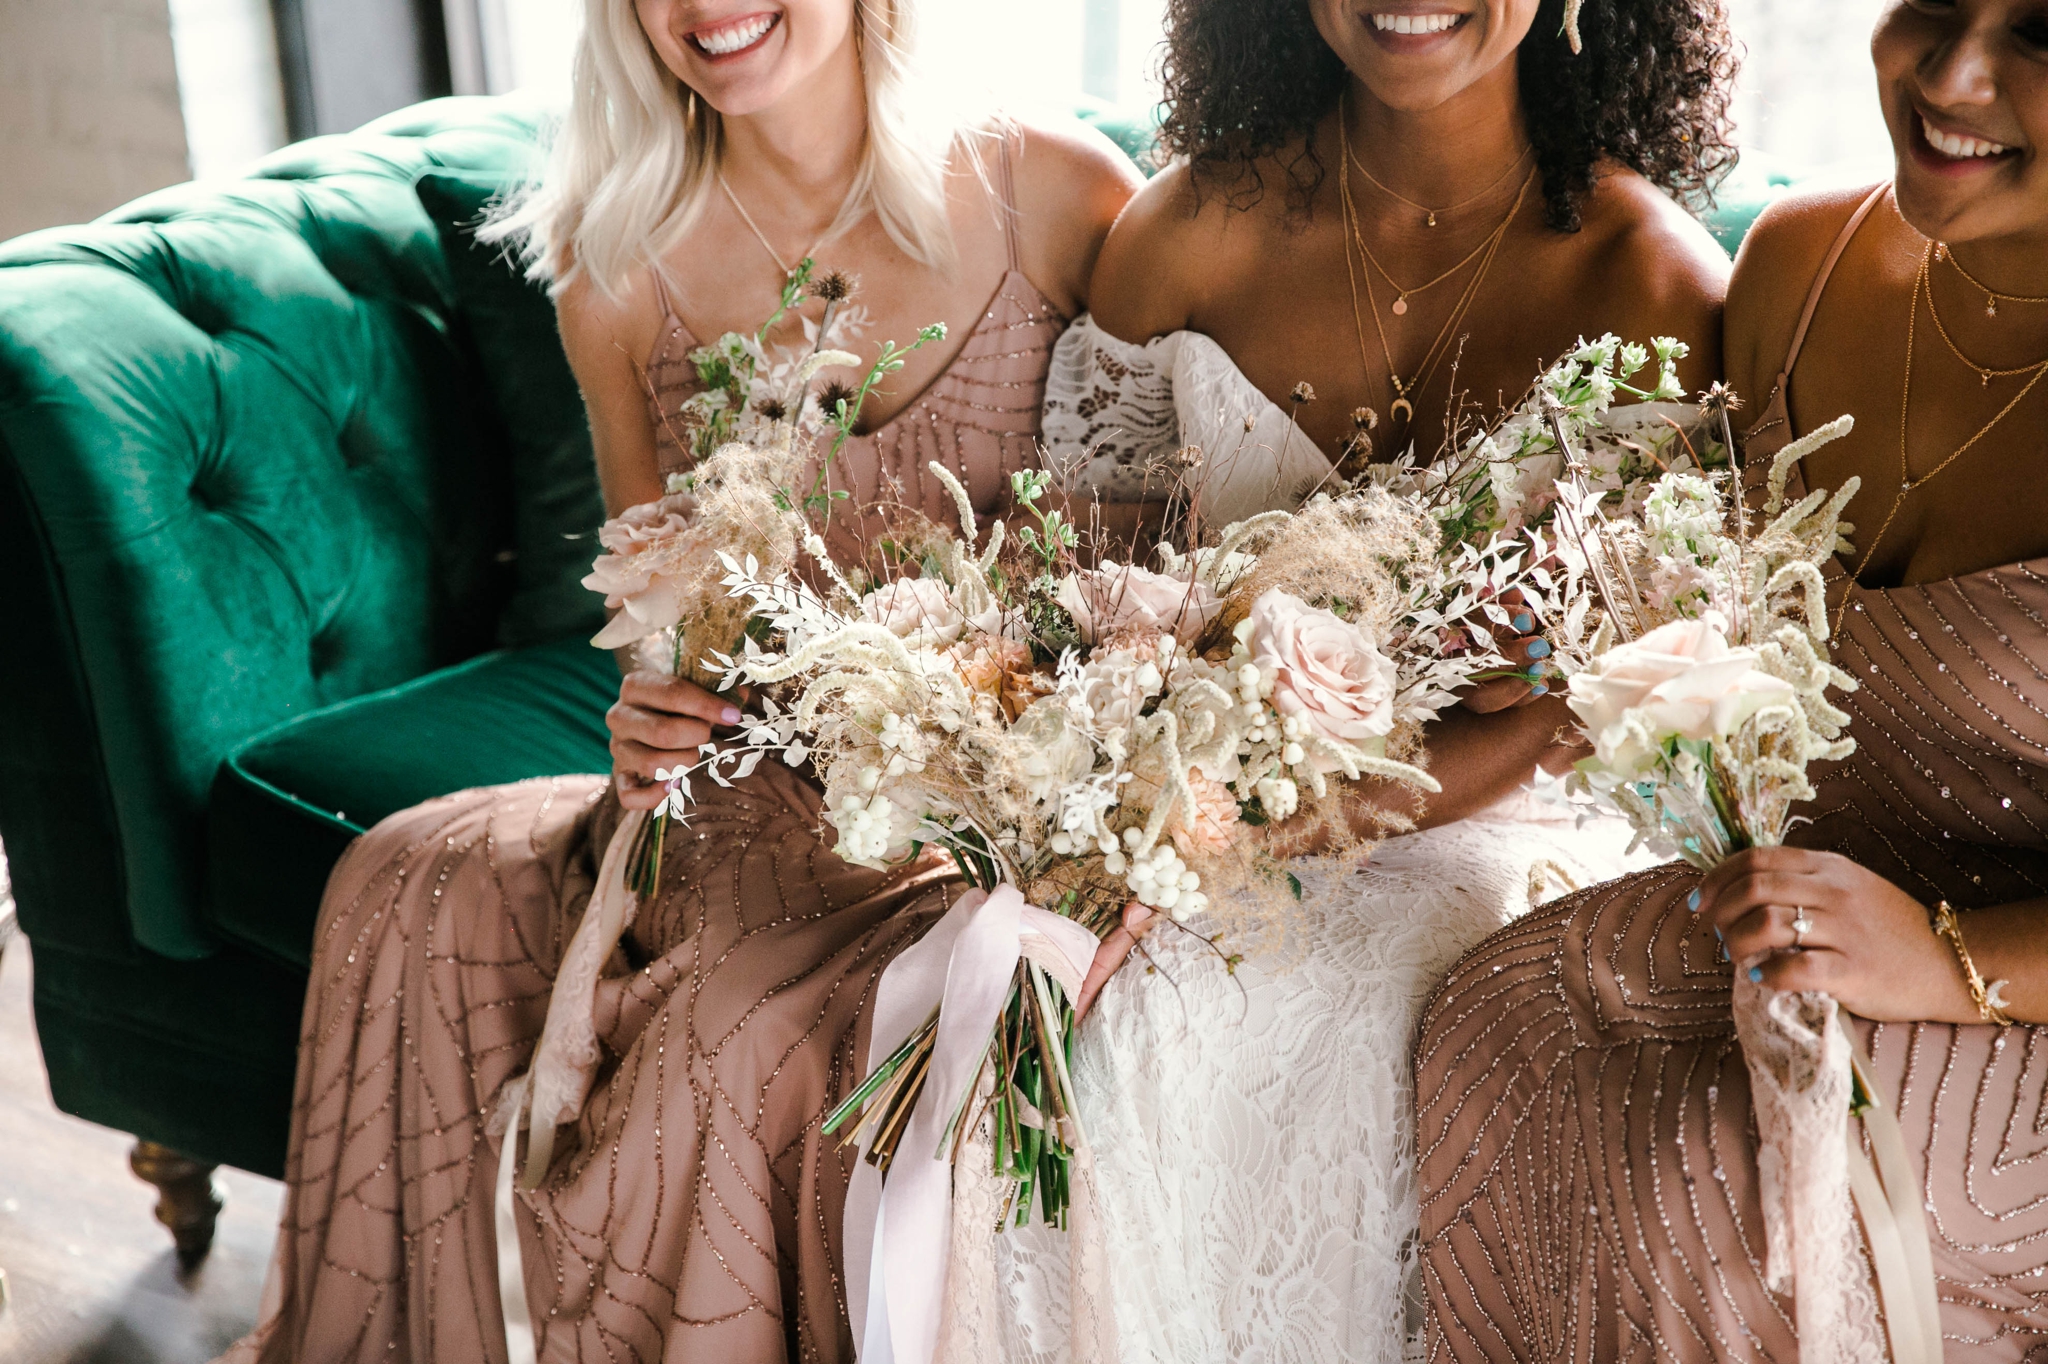  Indoor Natural light portrait of a black bride and her bridesmaids in a boho wedding dress with light pink bridesmaids dresses sitting on an emerald tufted sofa - laughing and having fun with each other- flowers in natural african american hair - oa